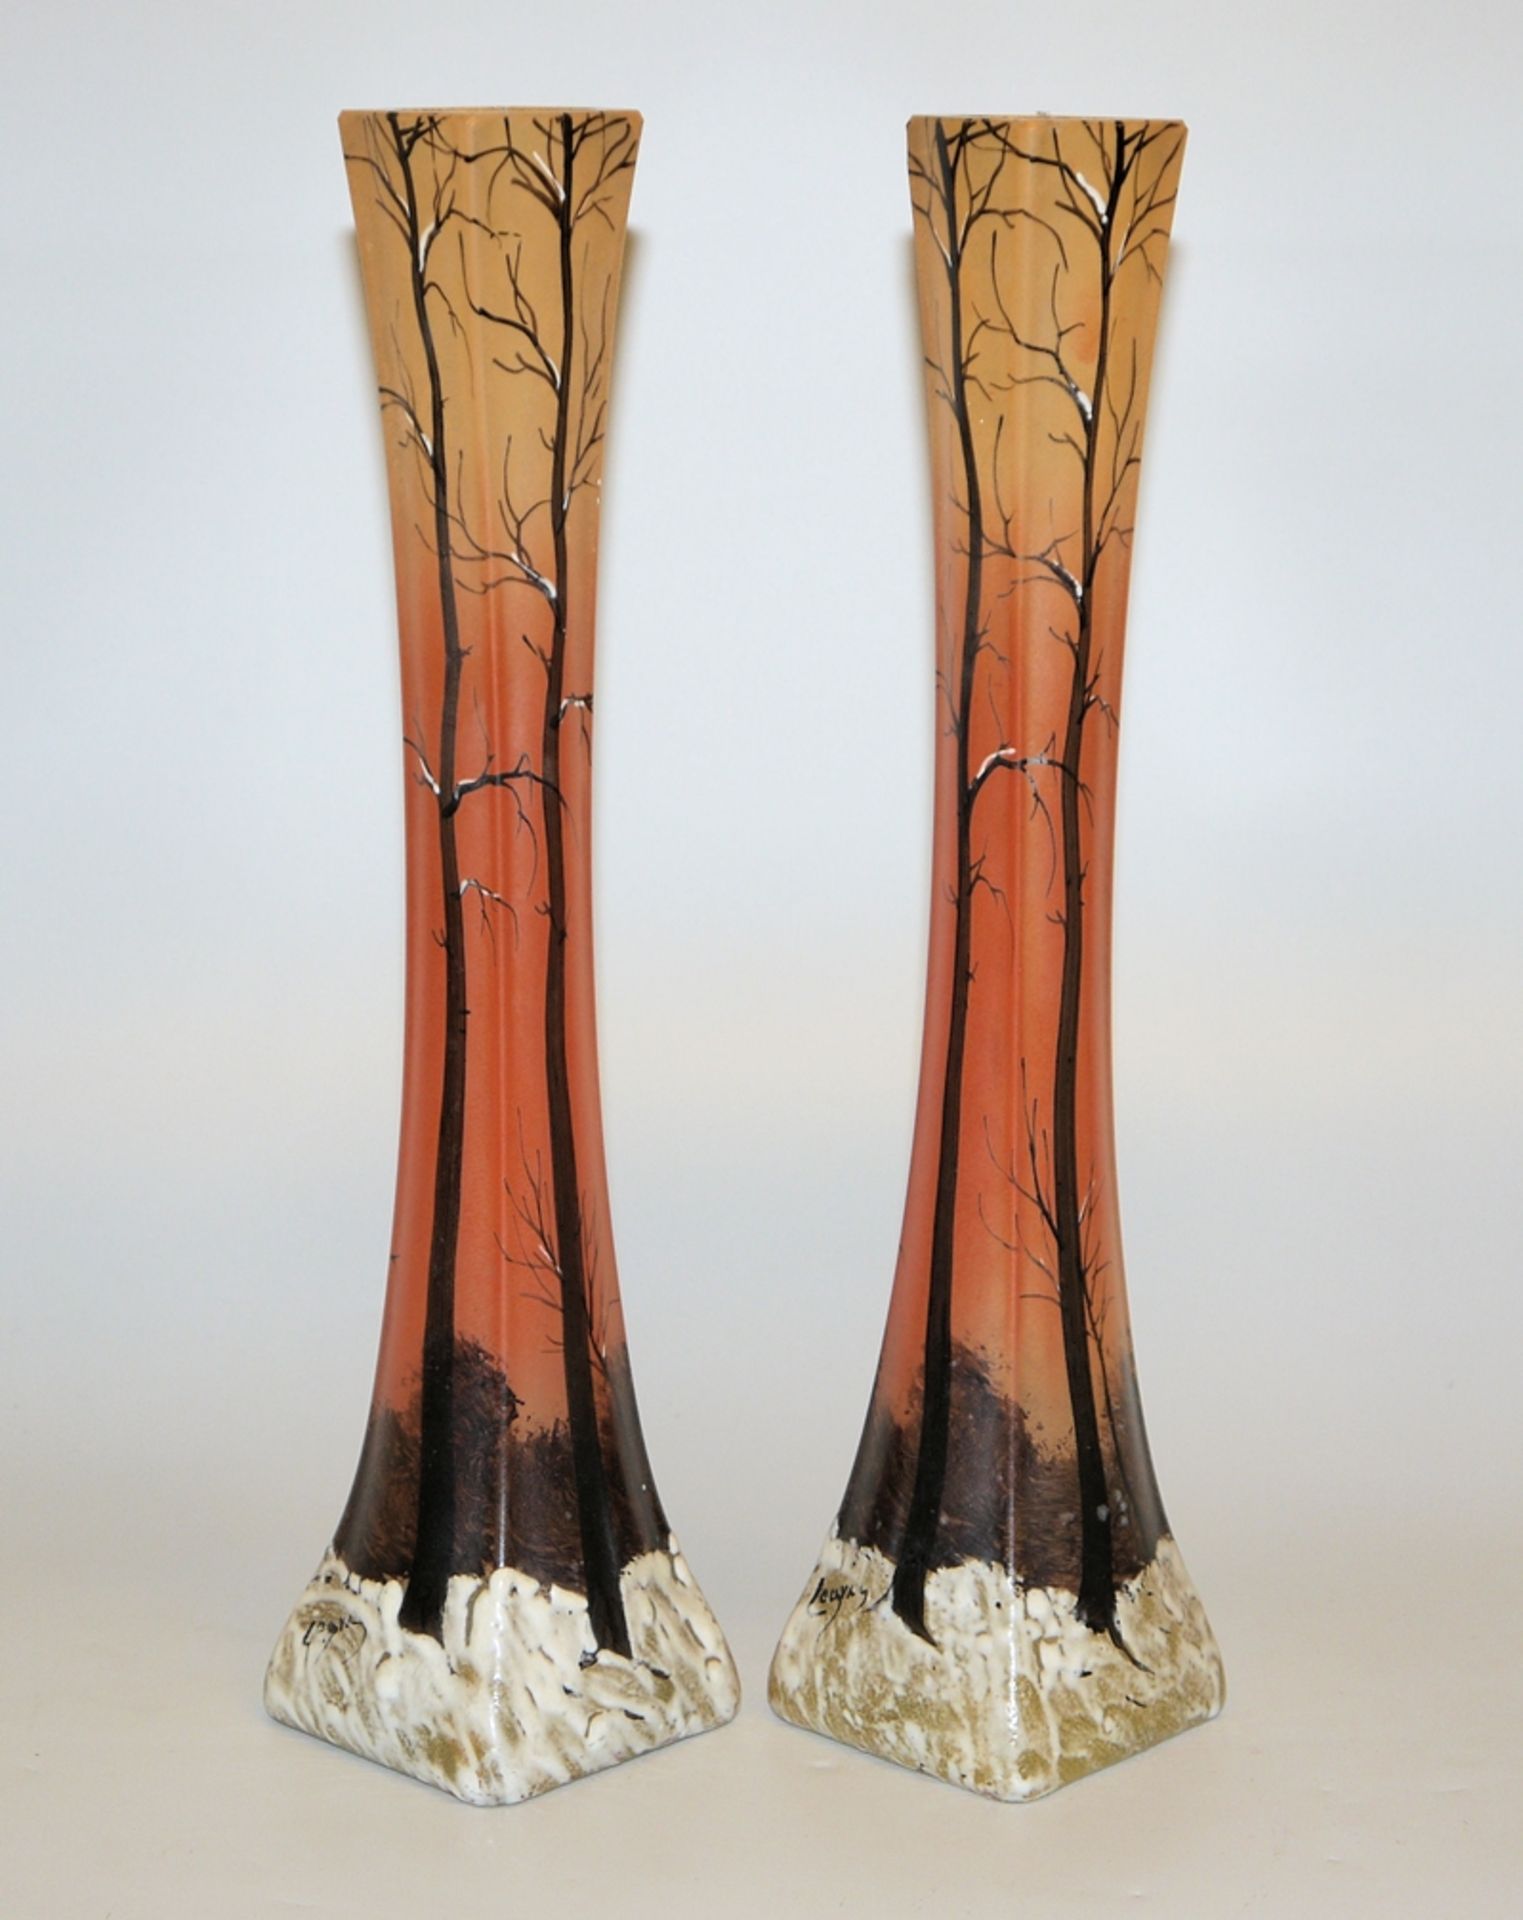 Pair of bar vases with winter landscapes by Legras, St. Denis circa 1910